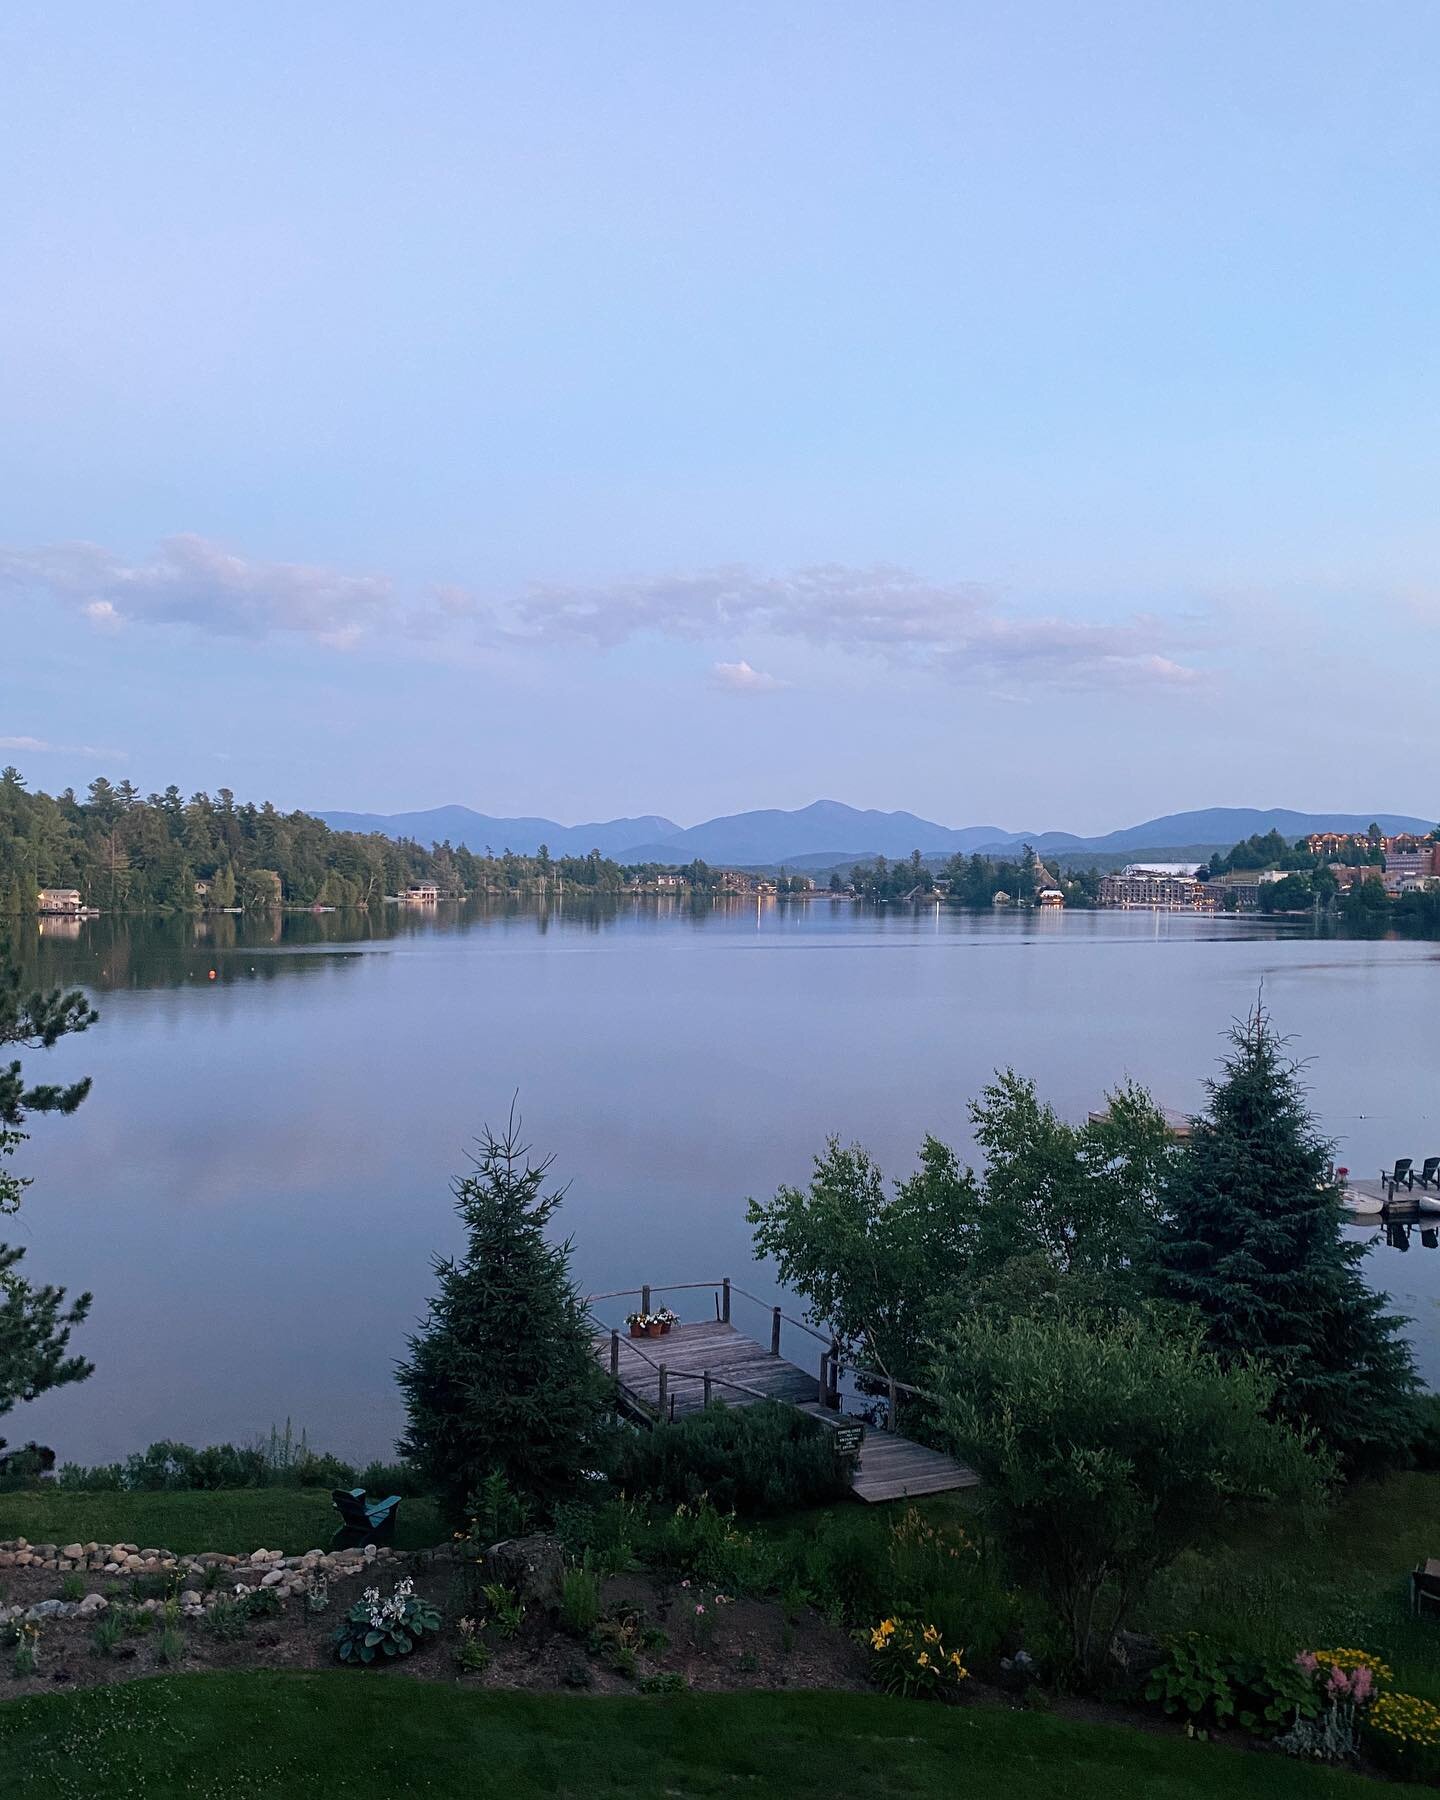 exploding with gratitude from the most spectacular weekend in a new-to-me place. lake placid, I&rsquo;ll be holding you in my heart forever. &hearts;️

flew into: @flyalbany (drove 2.5 hours to LP)
stayed: @mirrorlakeinn 
hiked: mount van hoevenberg
